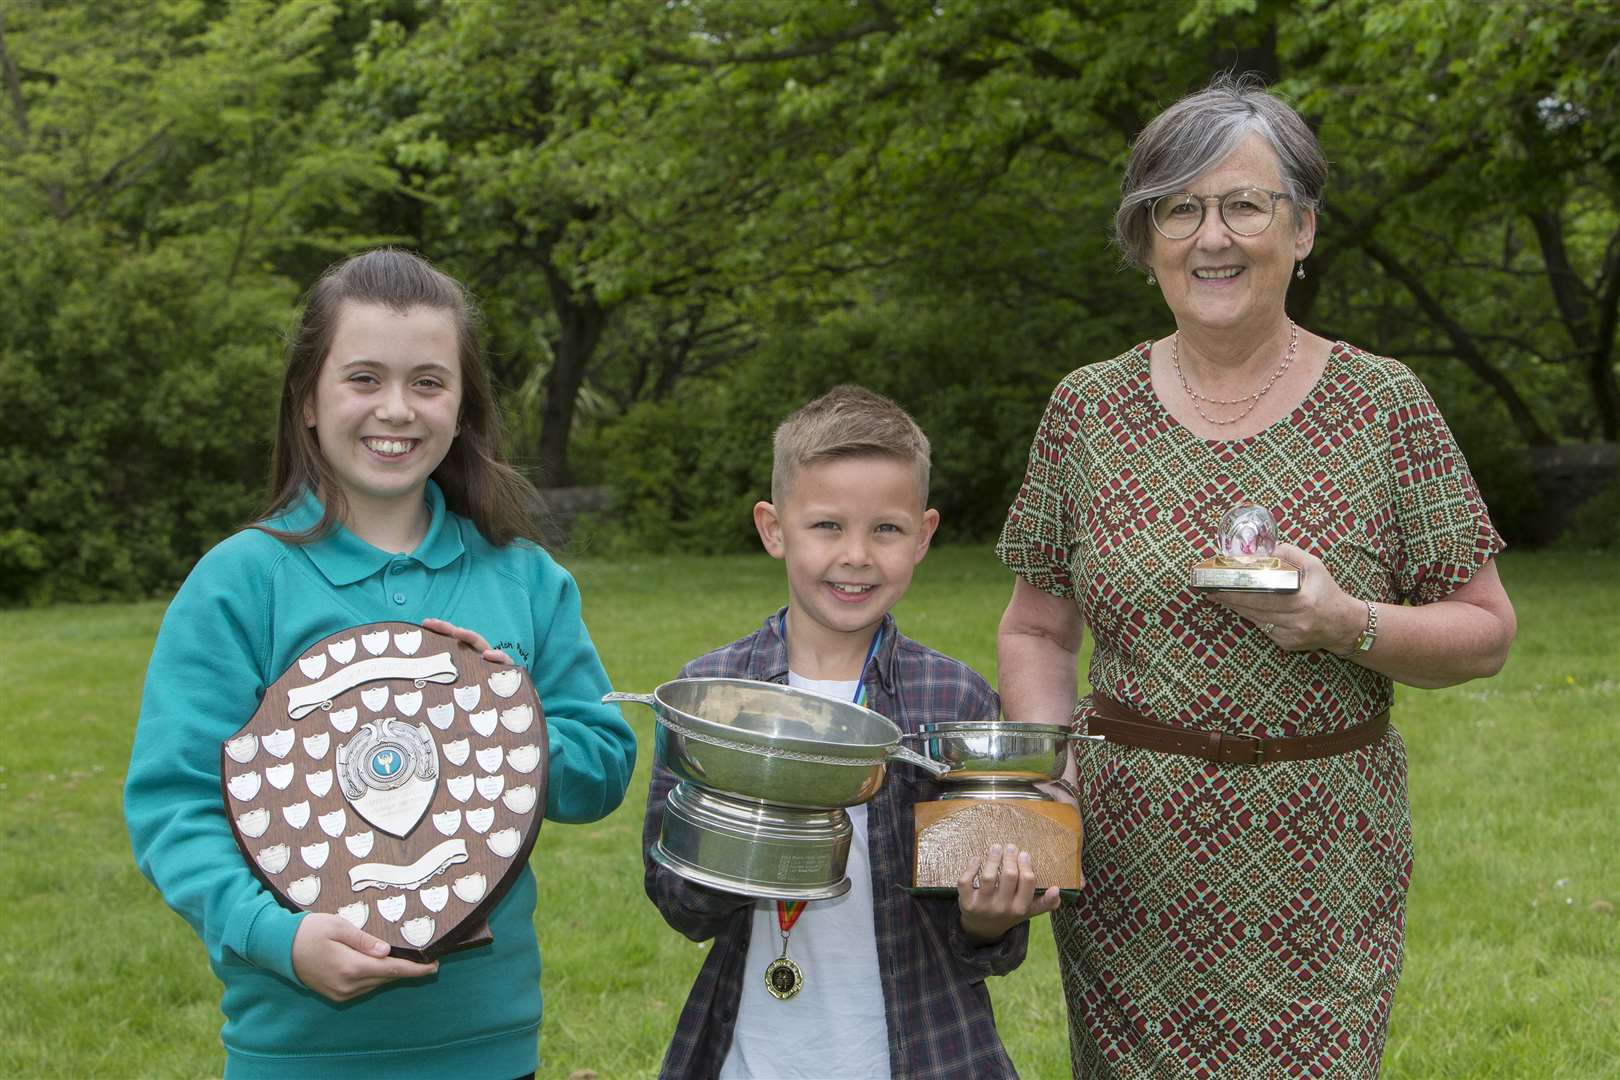 Alex Vines won the Field of Noss Quaich, the overall trophy for the children's Caithness dialect classes, and also received the James M Gunn Dialect Quaich for the P5 class. Lily Sutherland received the Omand Shield for P7 and Marney Bruce won the adult class, receiving the Caithness Glass Paperweight Trophy. Picture: Robert MacDonald / Northern Studios